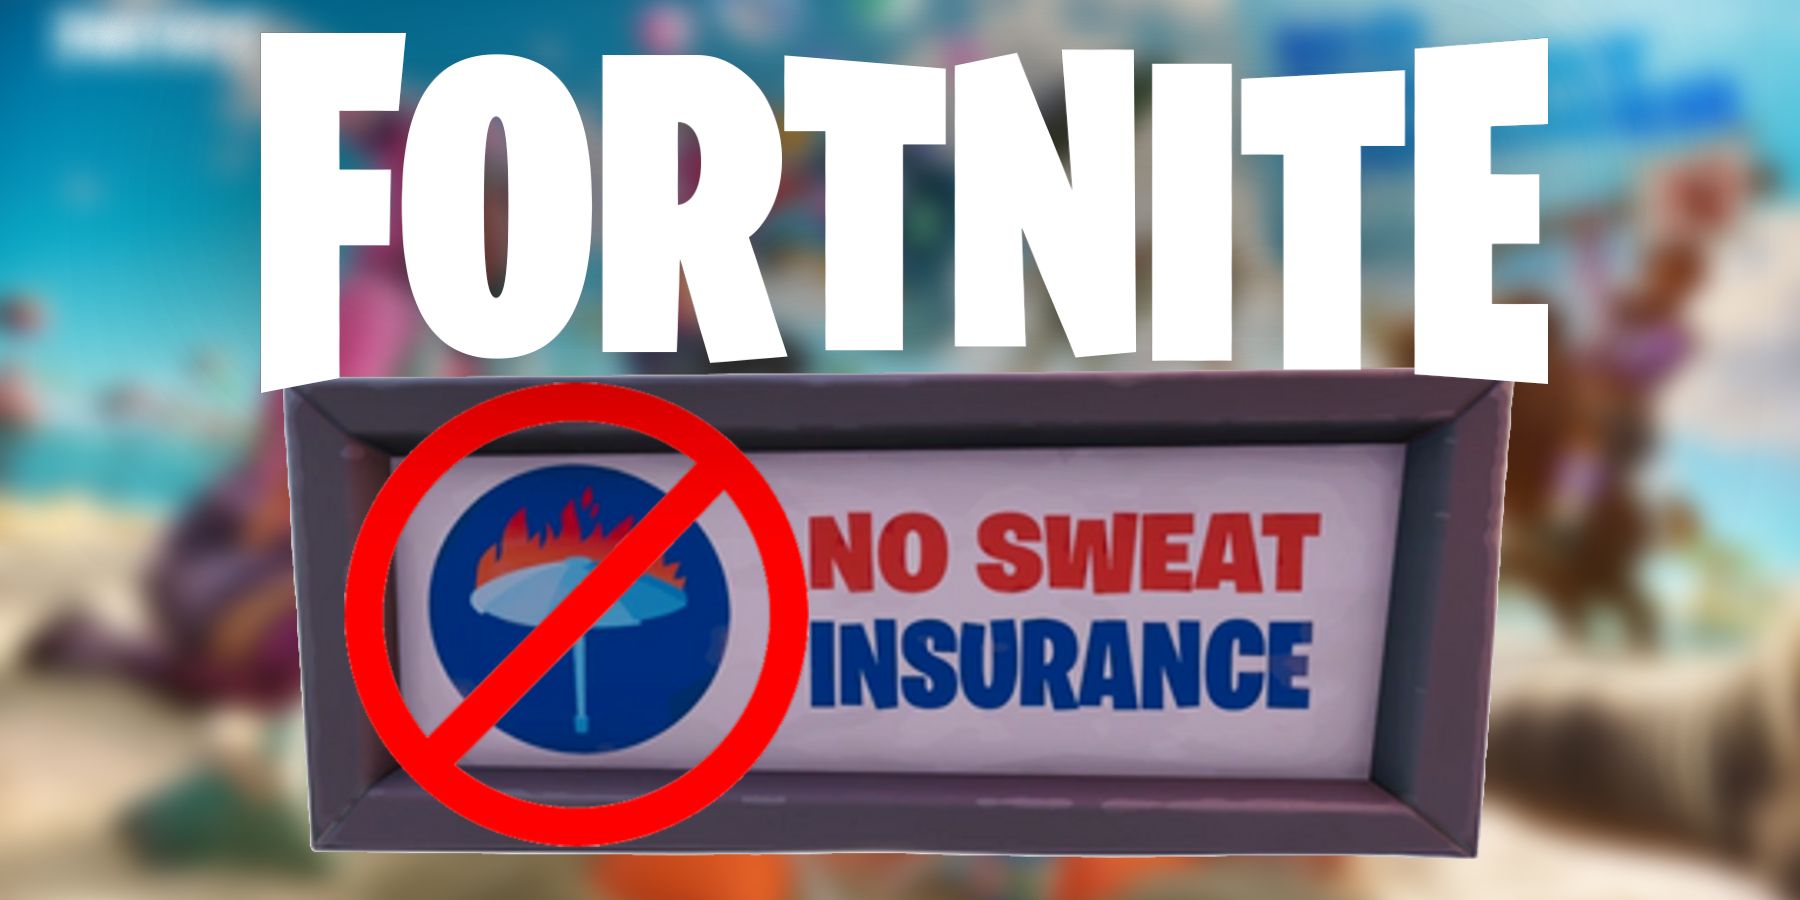 fortnite-remove-no-sweat-insurance-signs-quest-guide-where-how